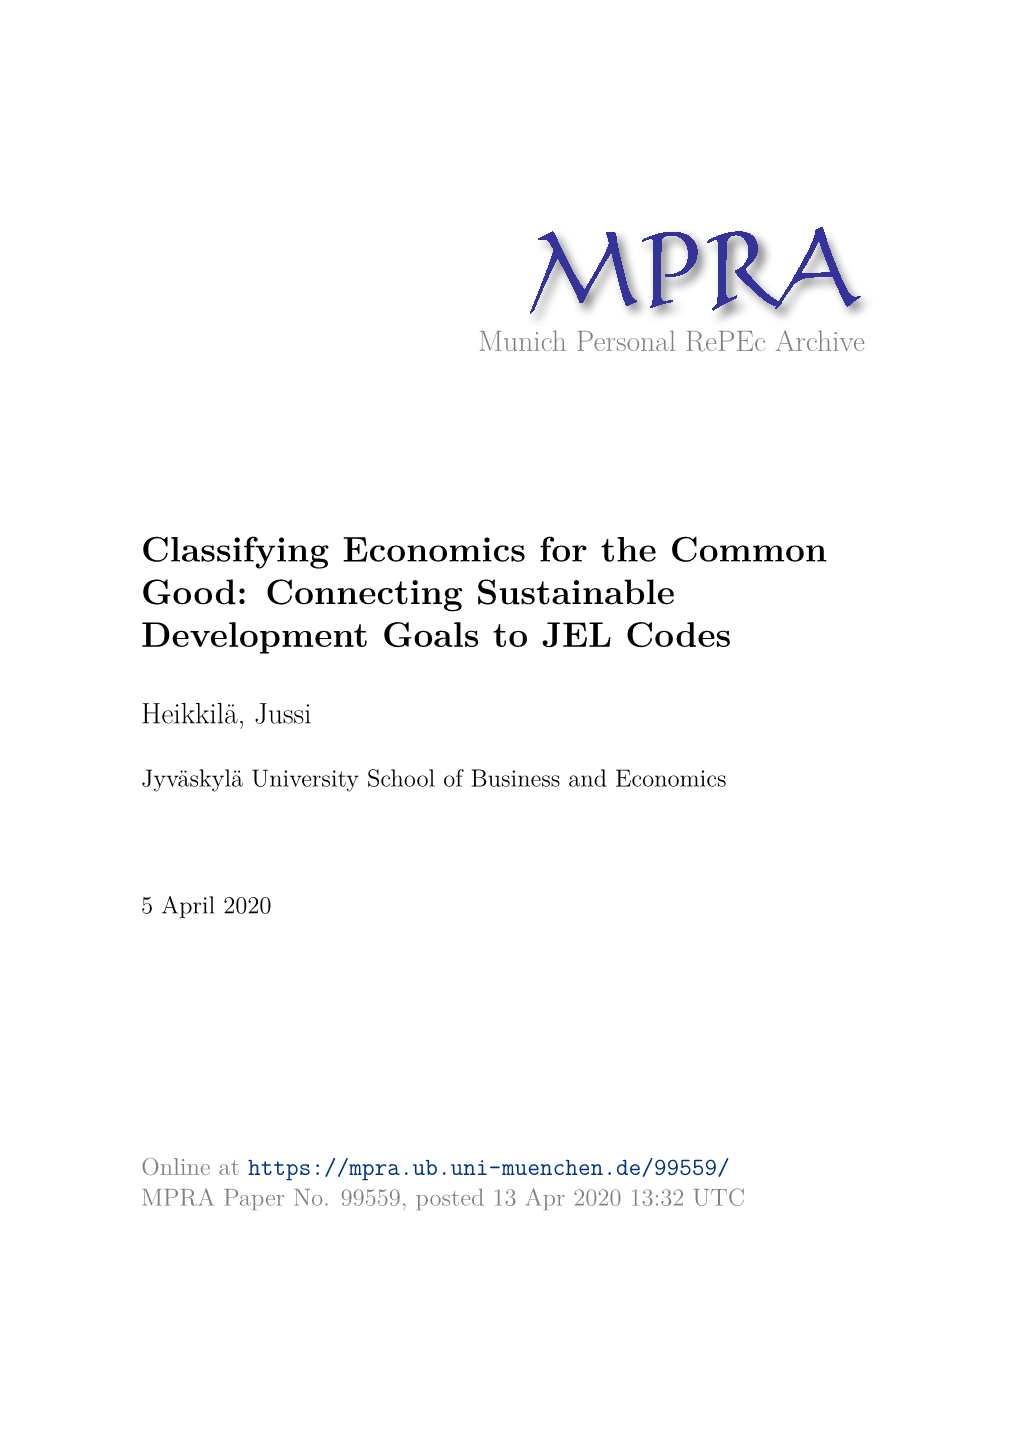 Classifying Economics for the Common Good: Connecting Sustainable Development Goals to JEL Codes